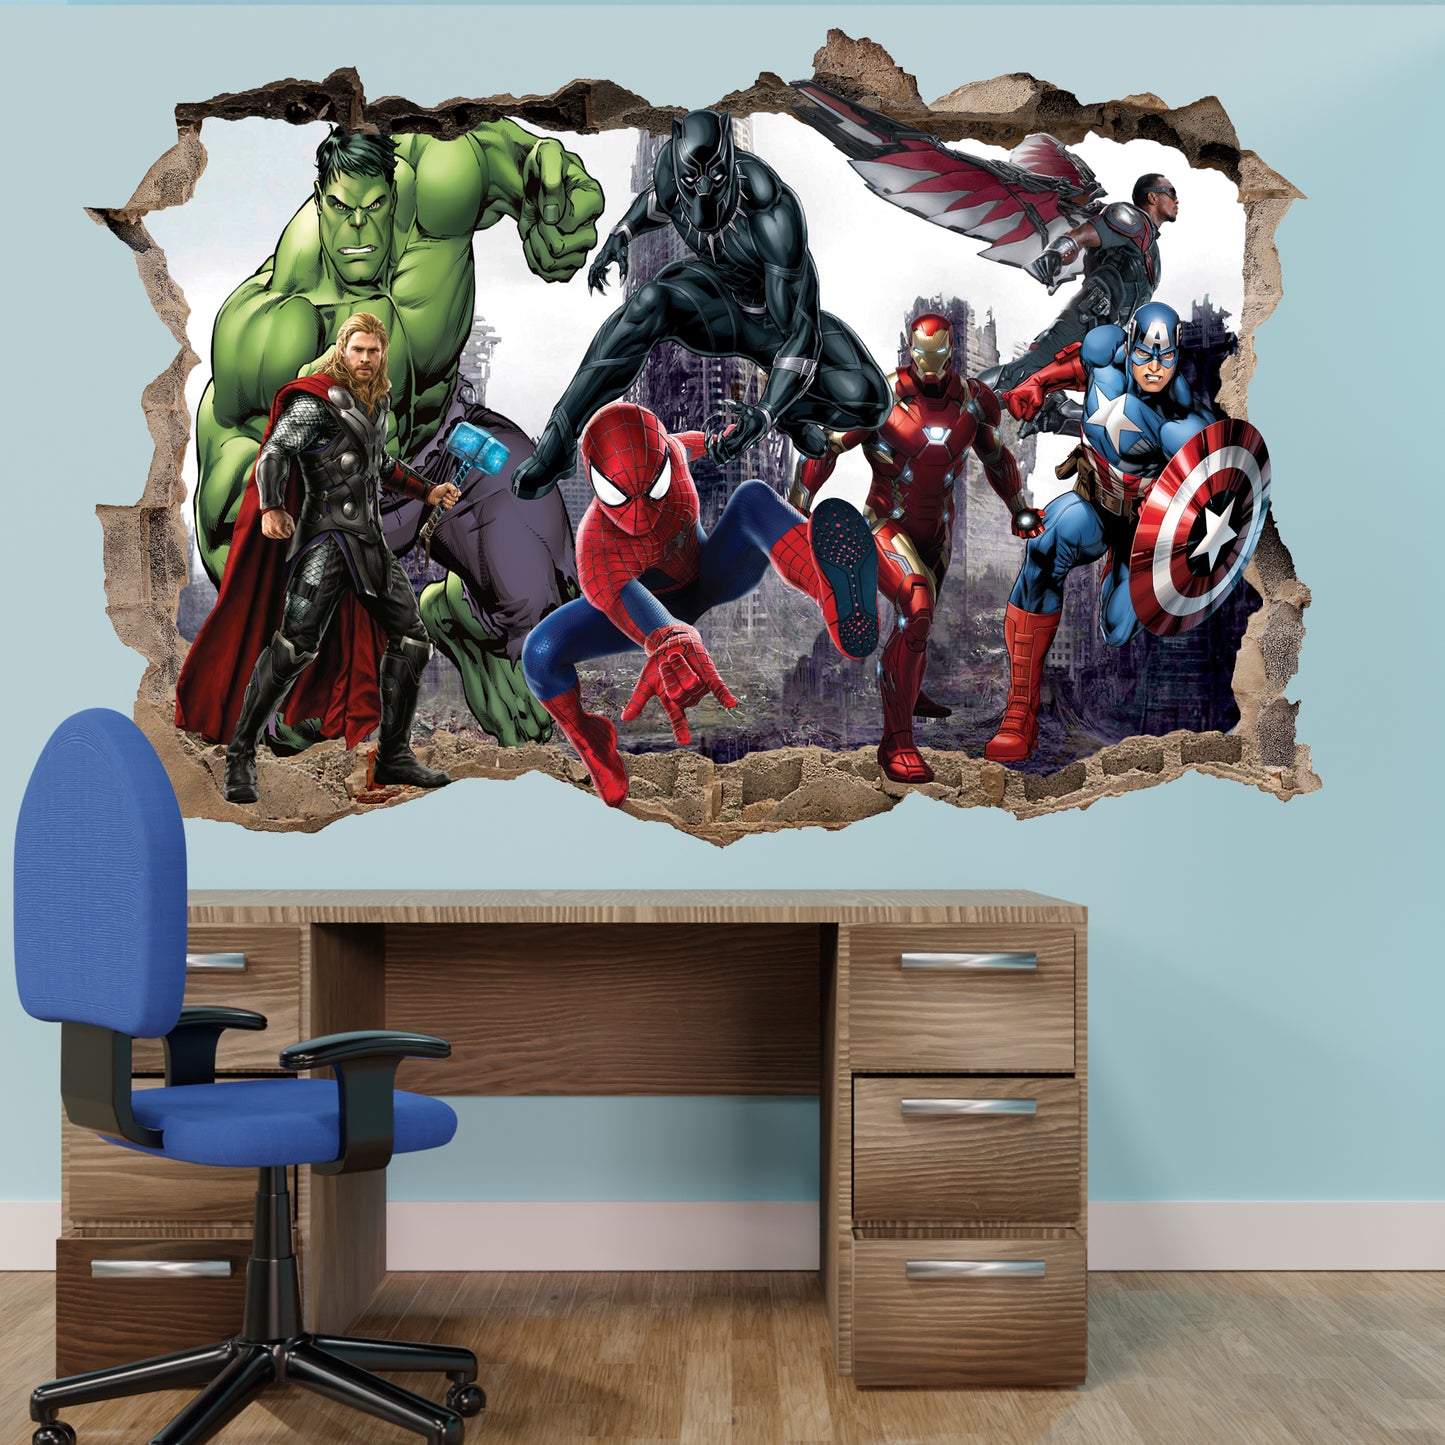 Wall Sticker Art Avengers Poster Thor Black Panther Spiderman Falcon  Nursery Room Decor Decal Mural 1155